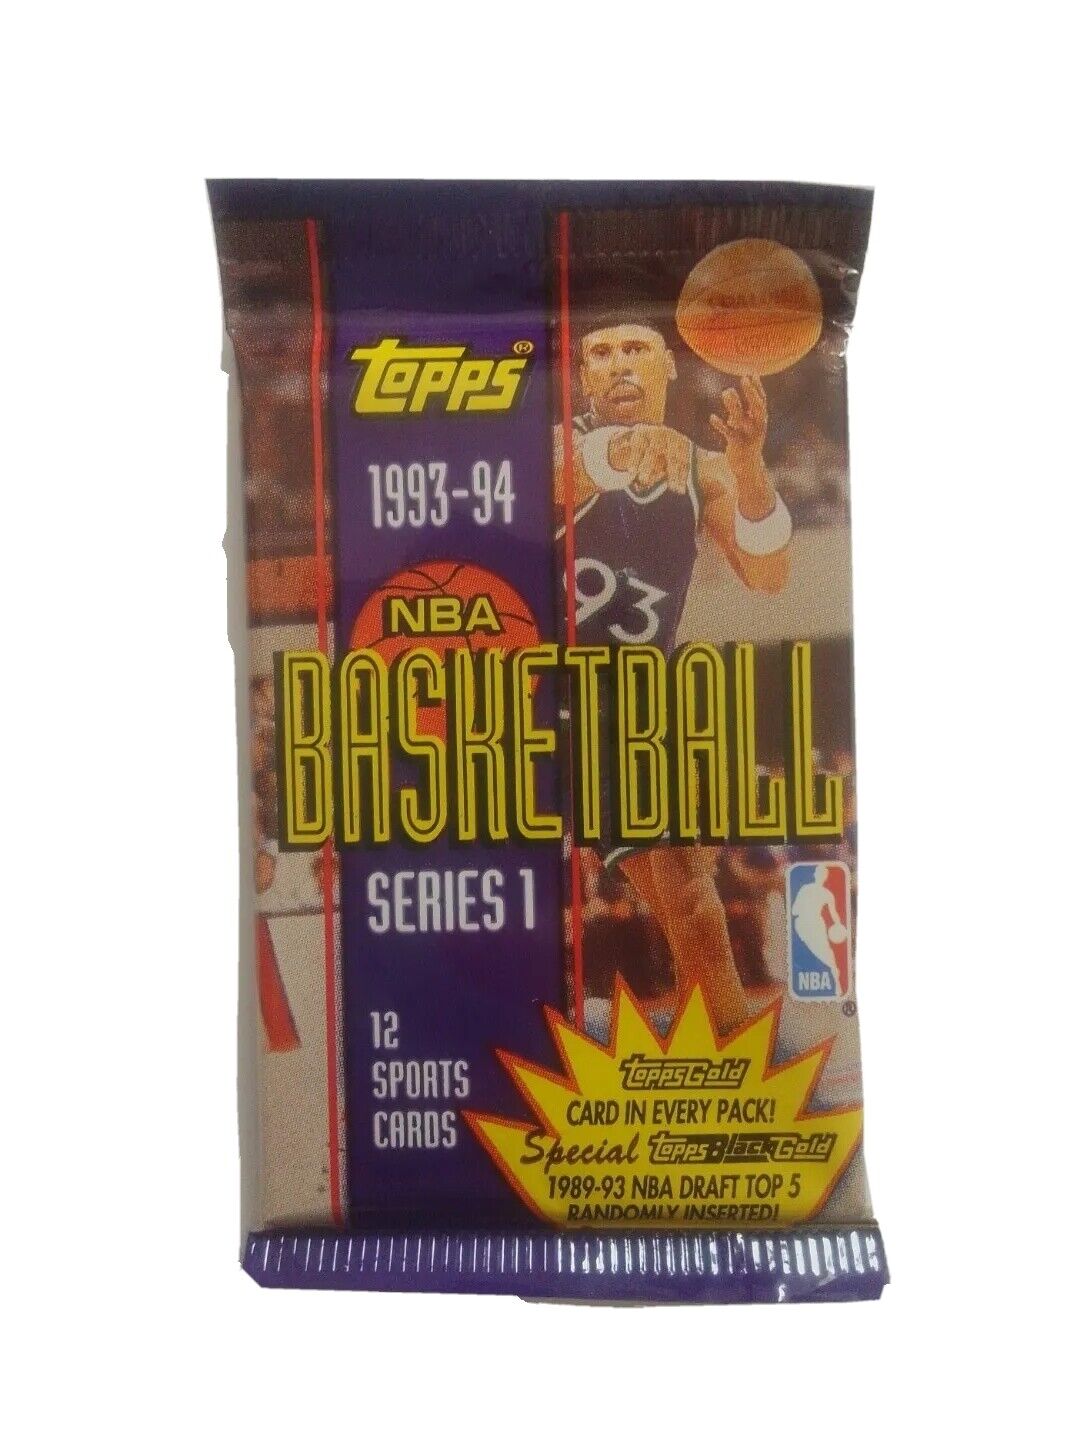 1993-94 Topps SERIES 1 NBA Basketball (12 Cards) Pack UNOPENED